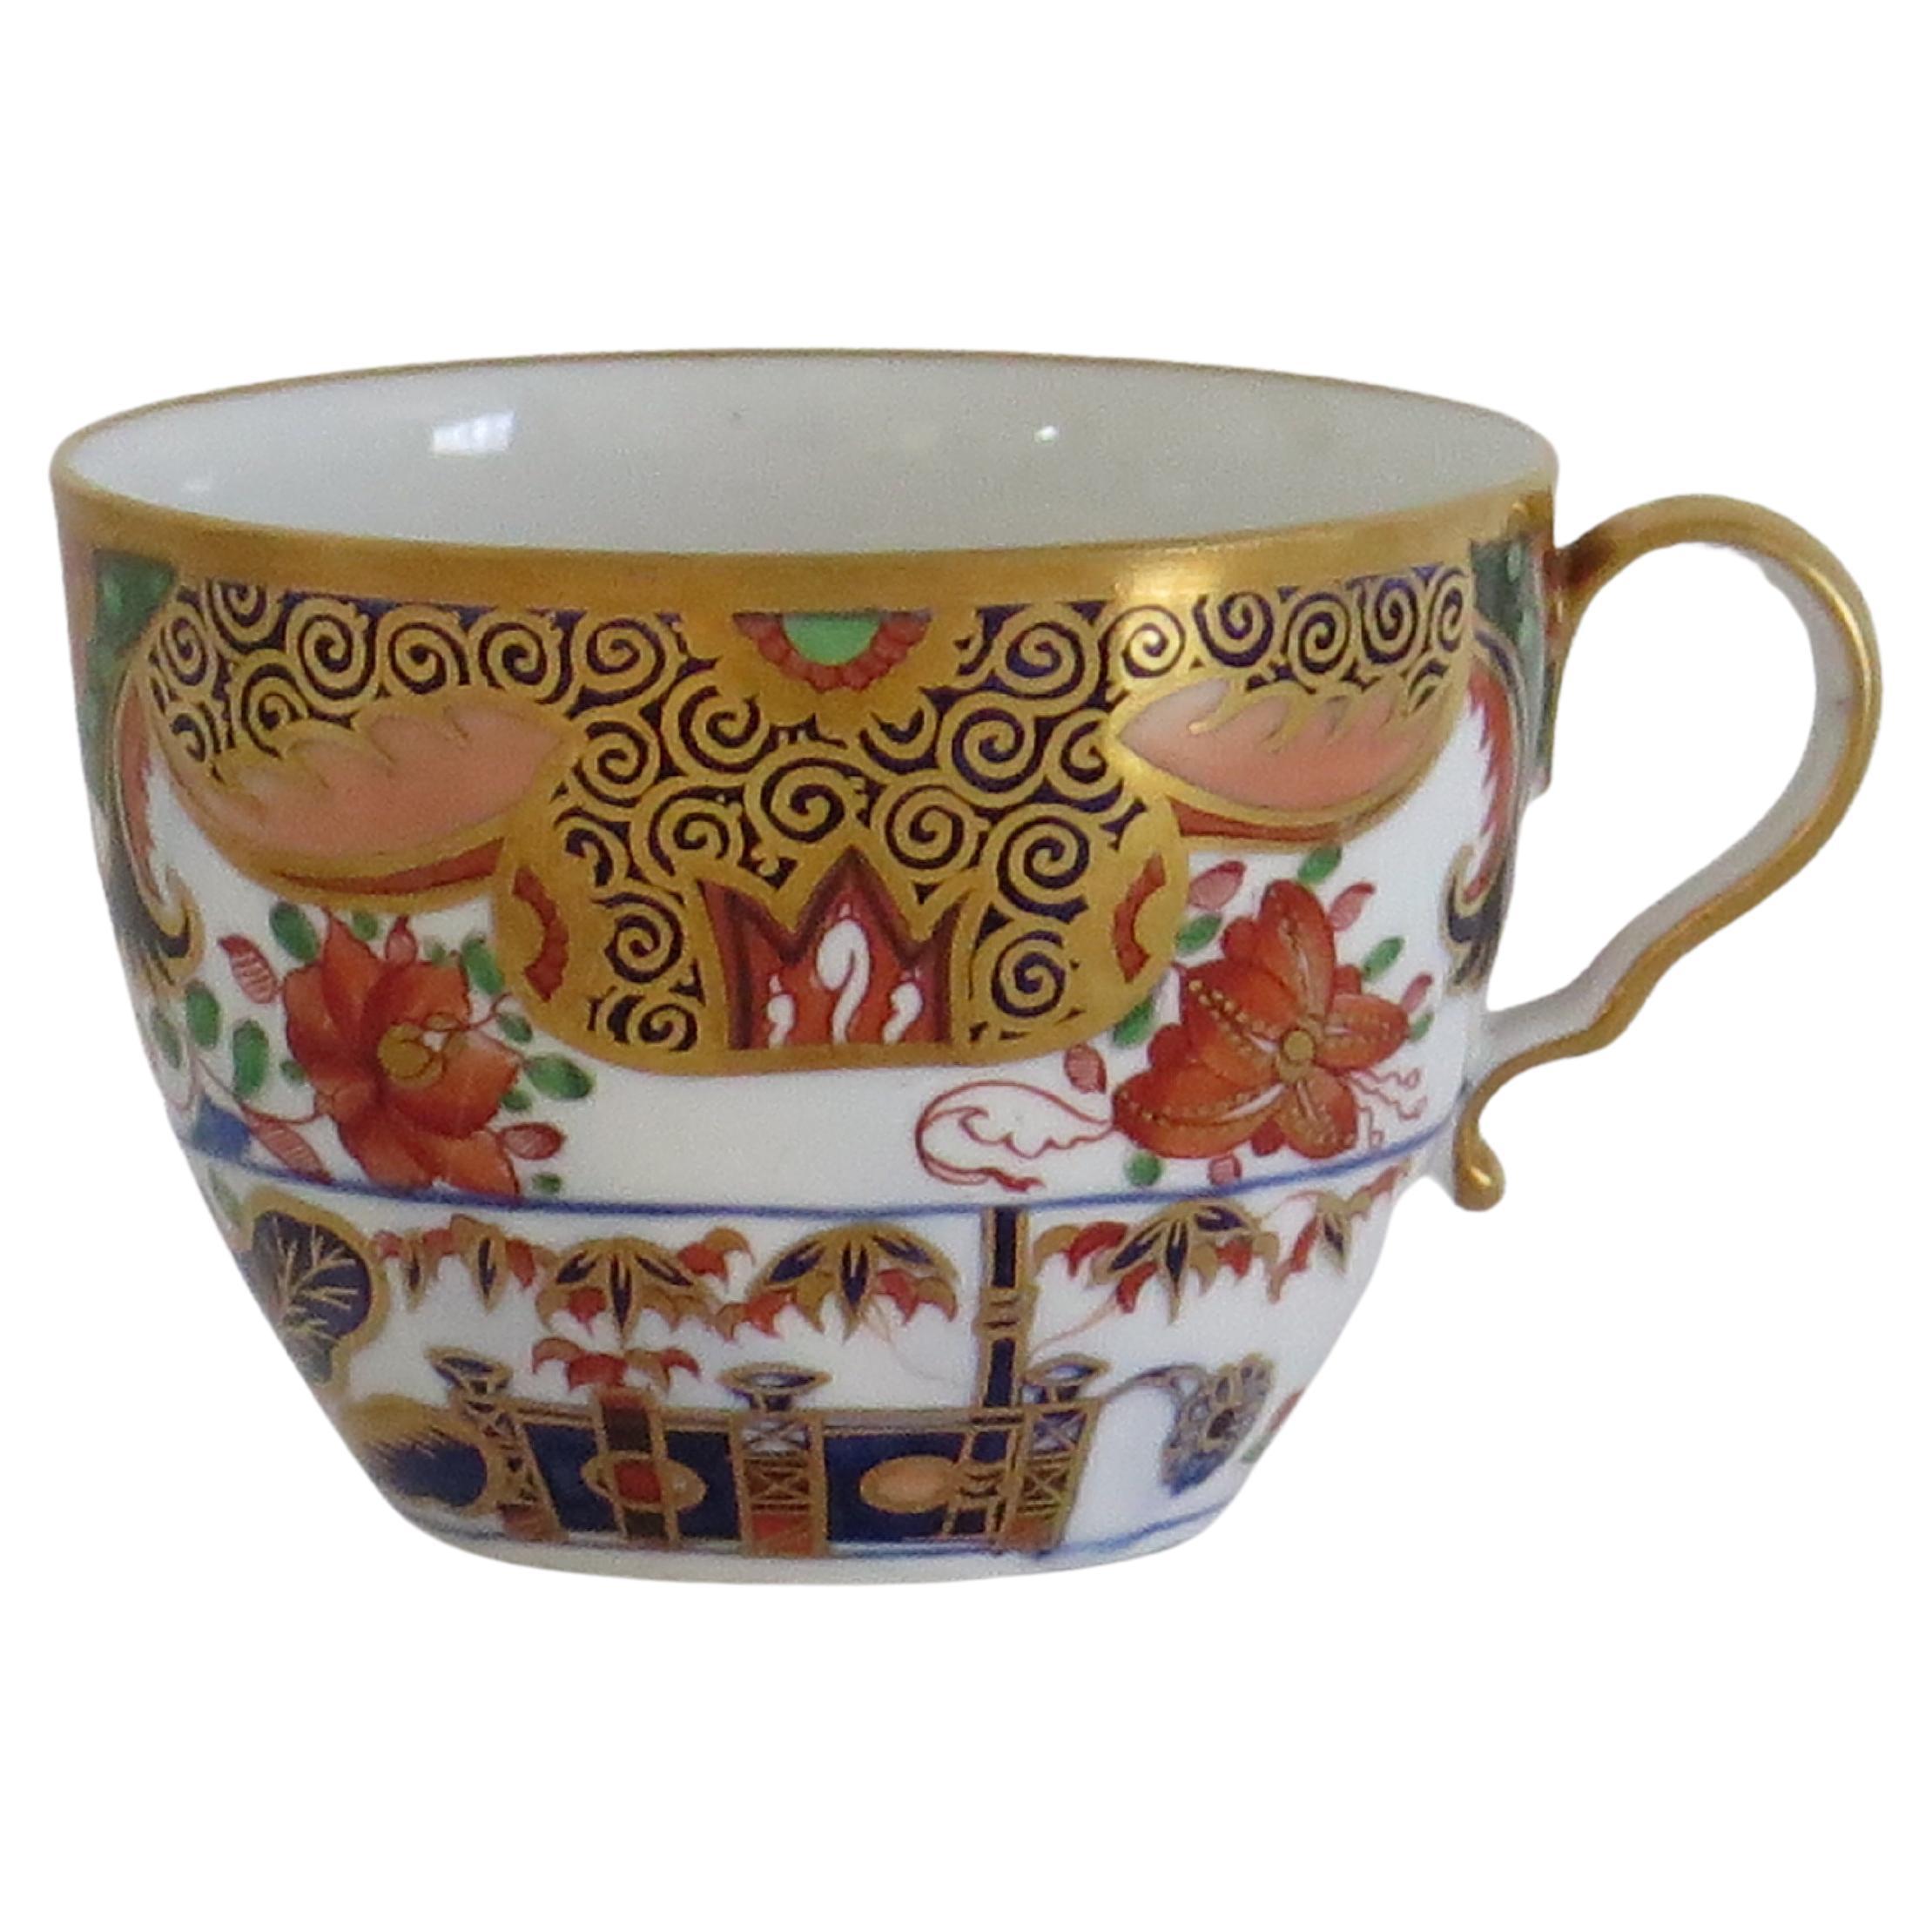 This is a fine example of an English George III period, porcelain Tea Cup, made by Spode and hand painted in Pattern 967, during the early 19th century, circa 1815.

The cup has the Spode loop handle with a pronounced kick or kink to the lower